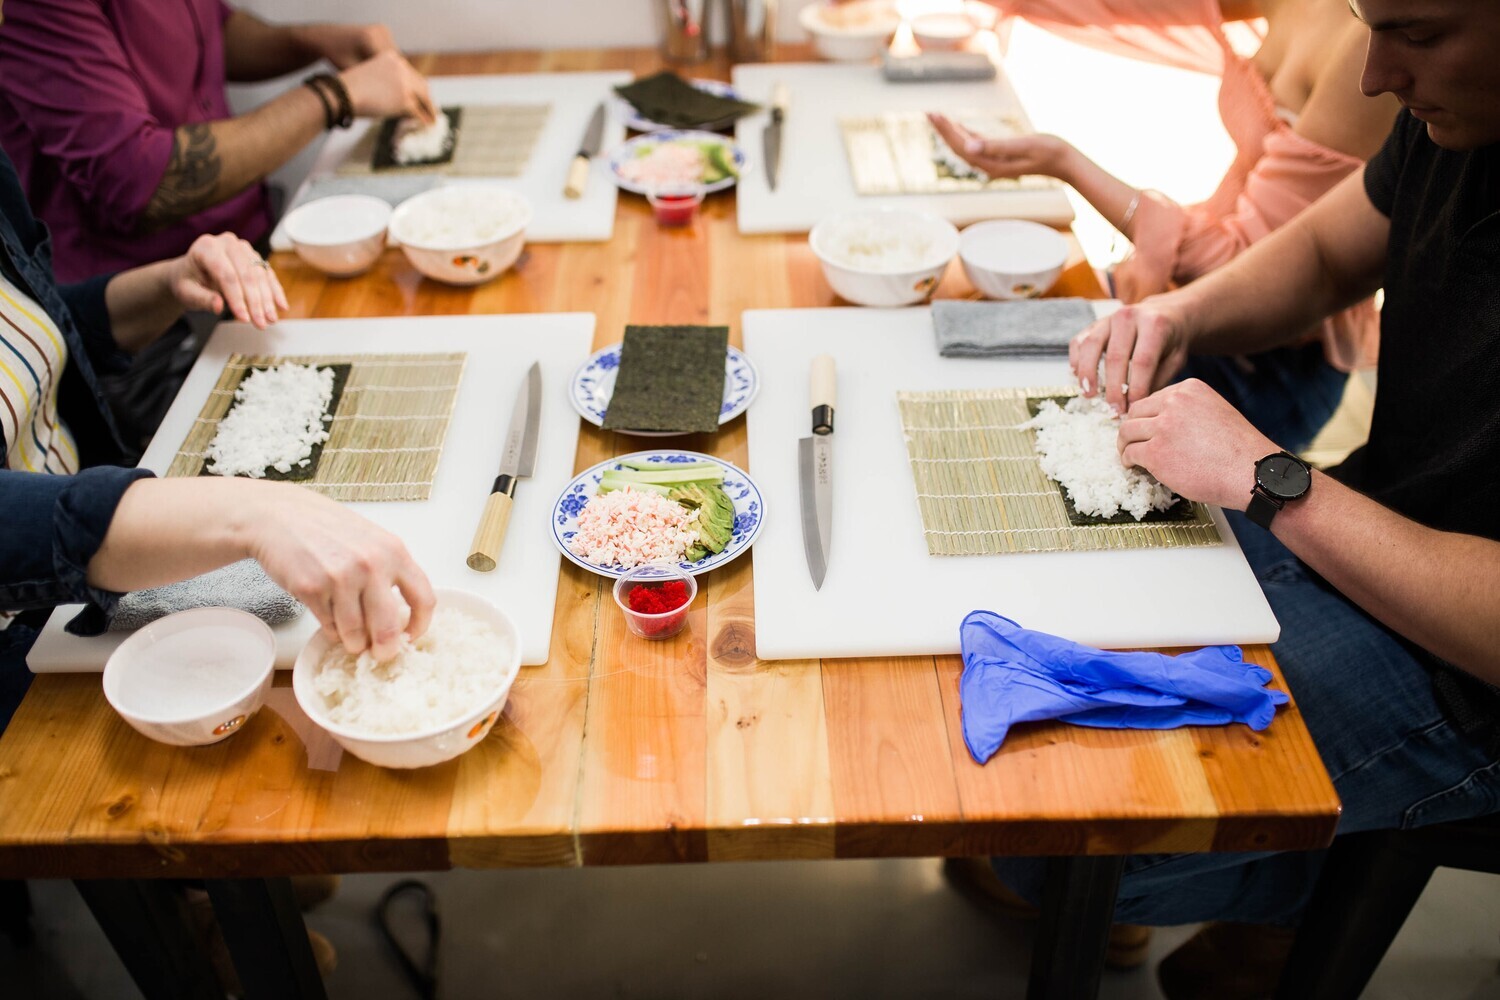 7/17/22 - Intro to Making Sushi Class